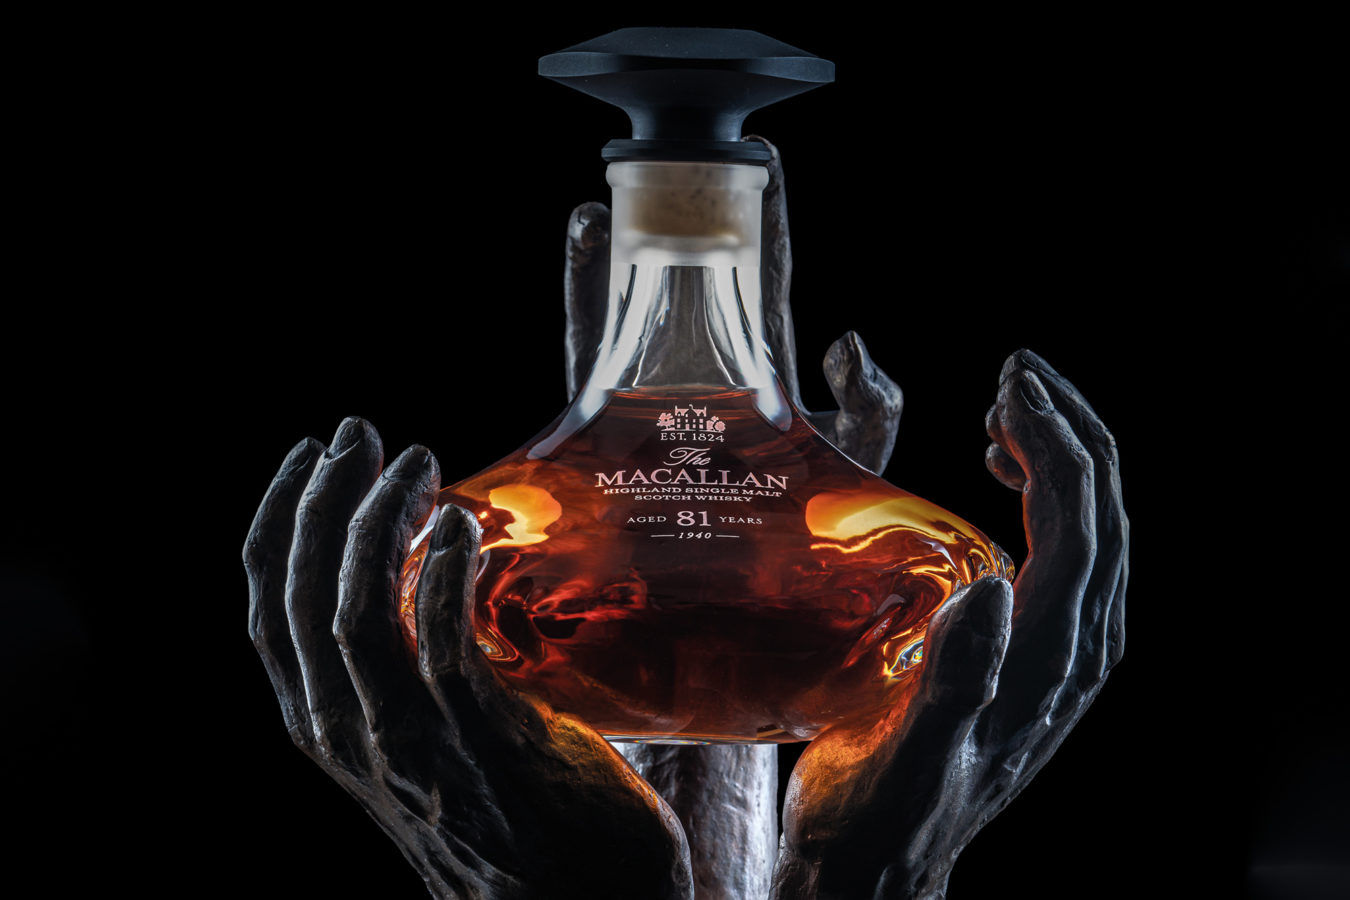 A Hand in History: A Collaboration Between The Macallan The Reach and Scottish Artisans